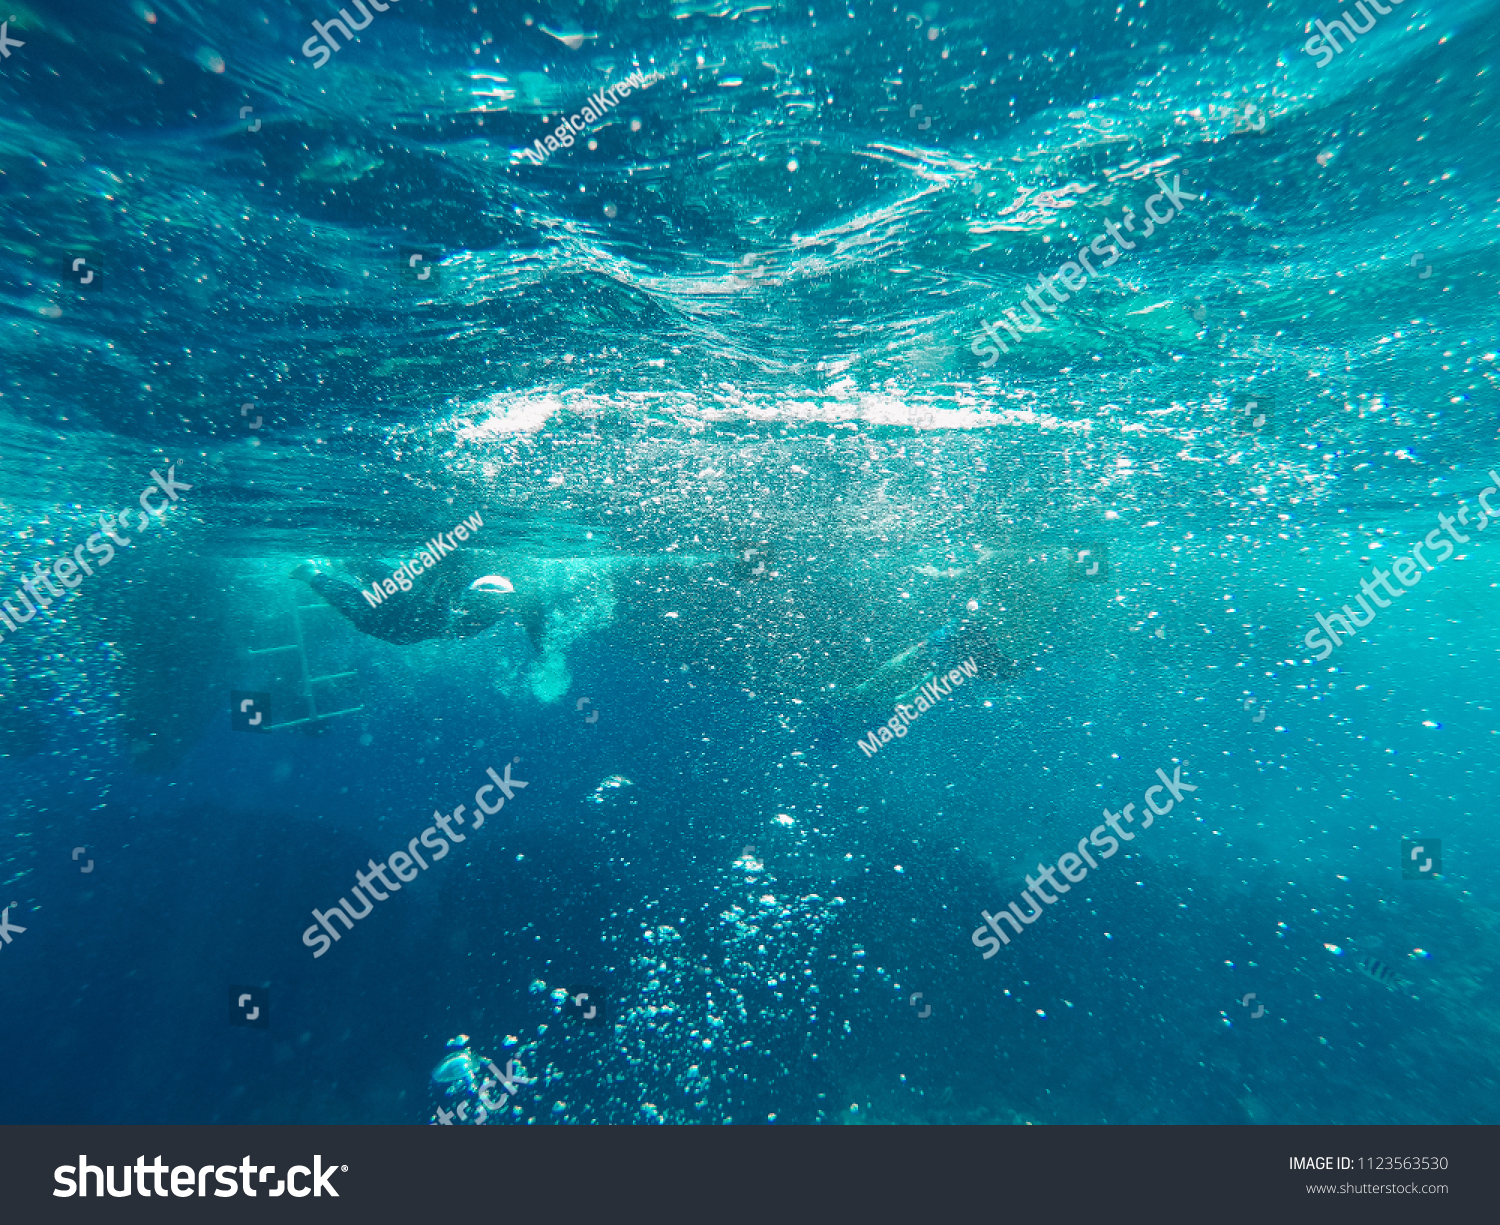 Bubbles in turquoise blue water in red sea. Sunny day #1123563530